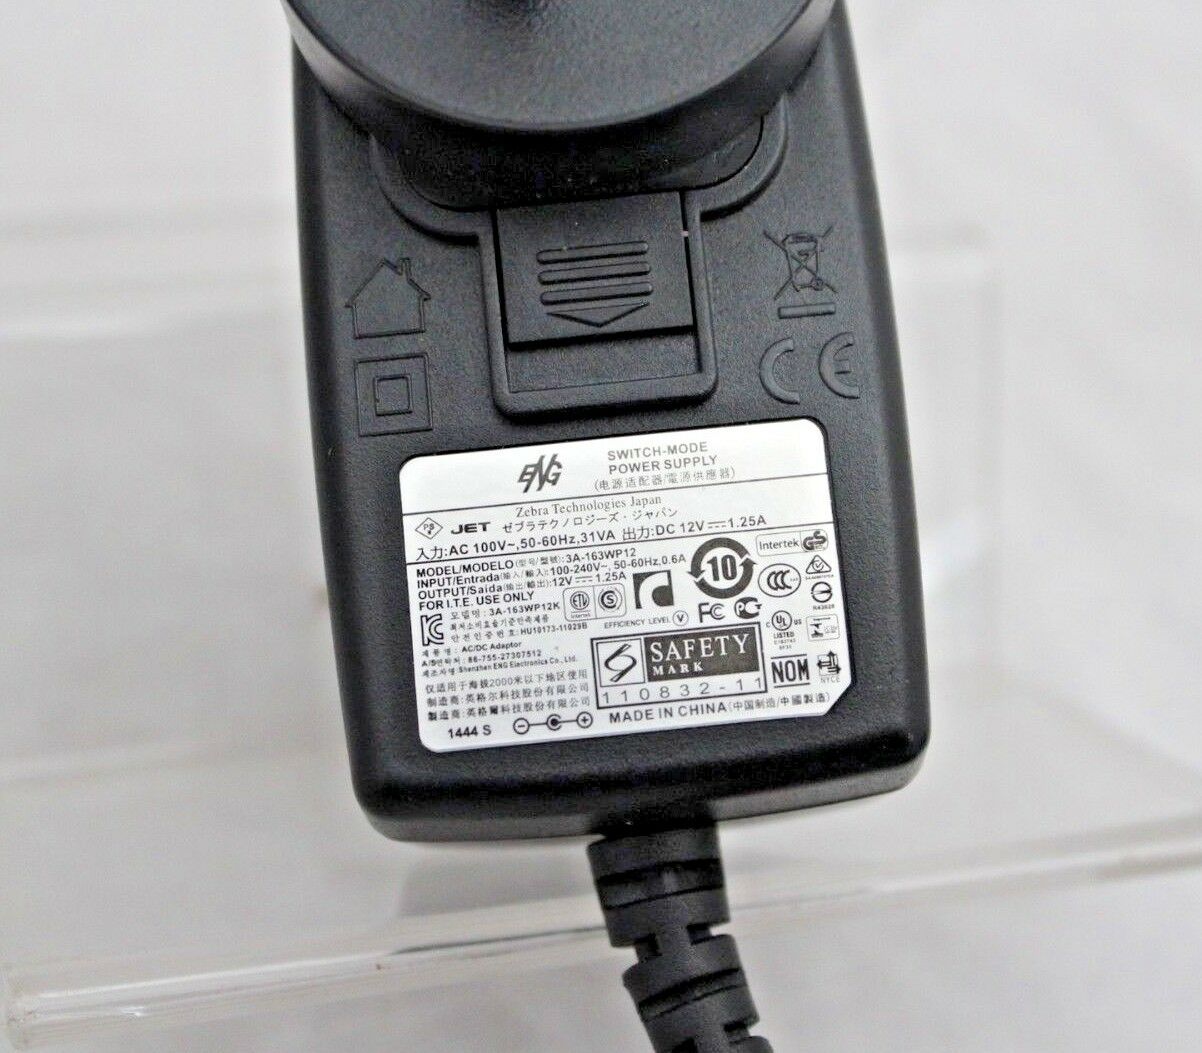 ENG Switch-Mode Power Supply Adapter Charger 3A-163WP12 12V 1.25A Features: Wall Charger Compatib